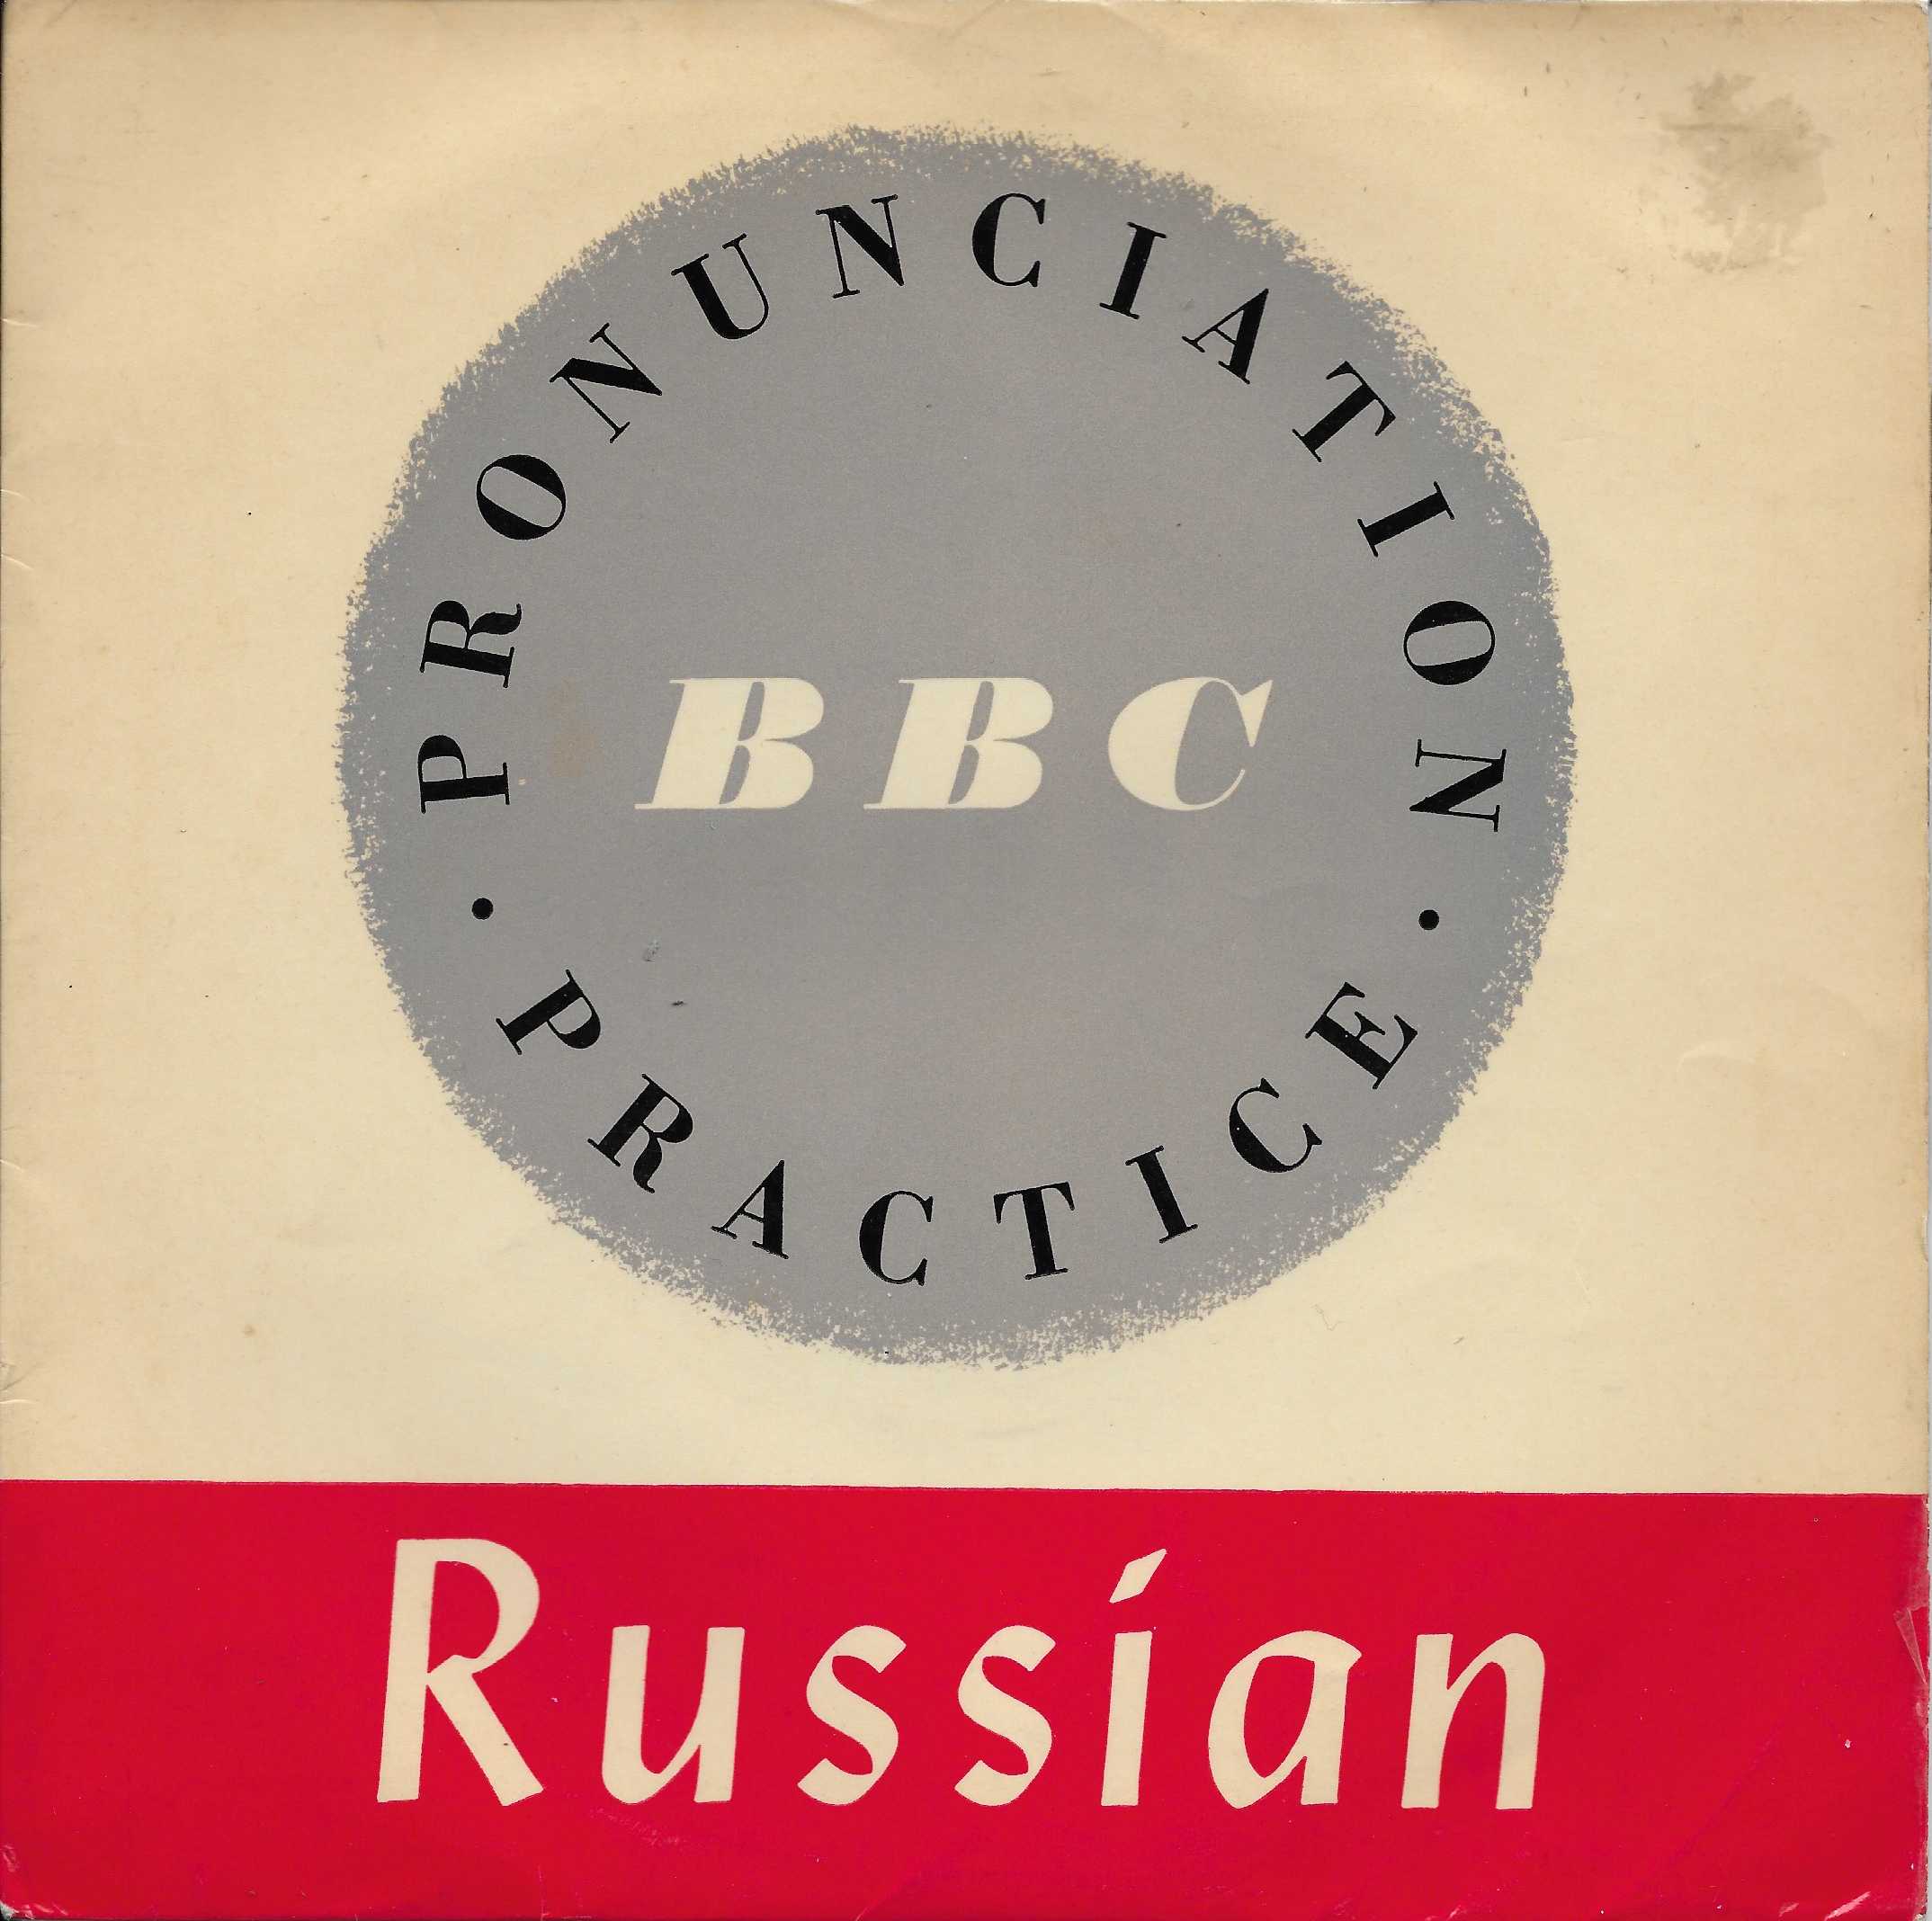 Picture of RUS-A-1 Russian by artist Dennis Ward from the BBC records and Tapes library